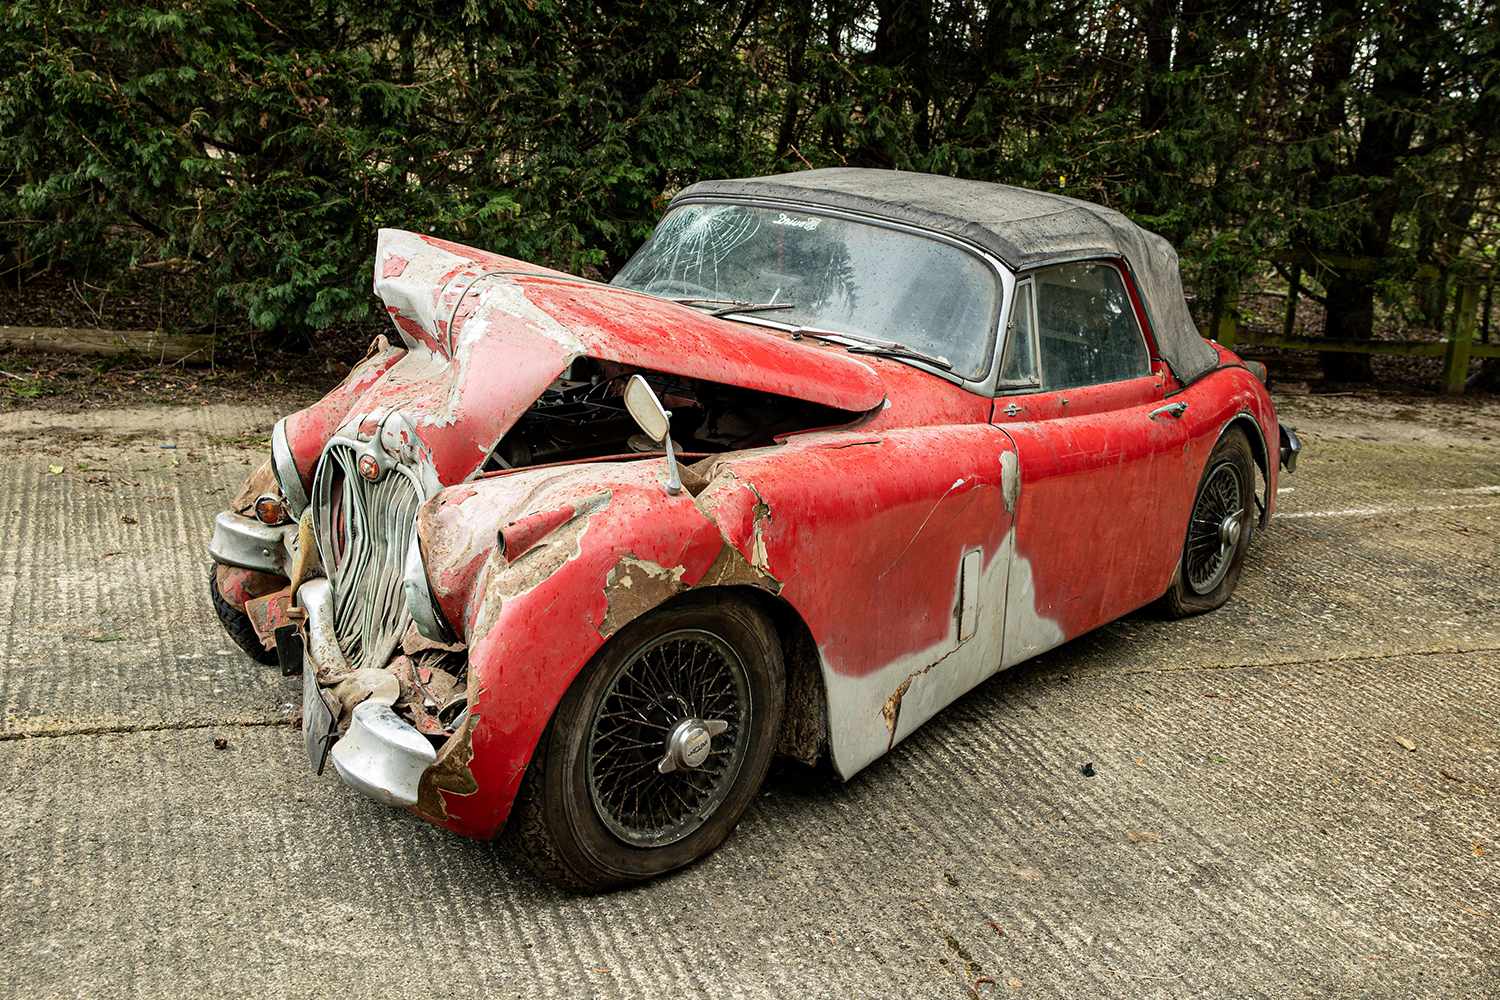 A red 1960 Jaguar XK150 that was driven into a tree